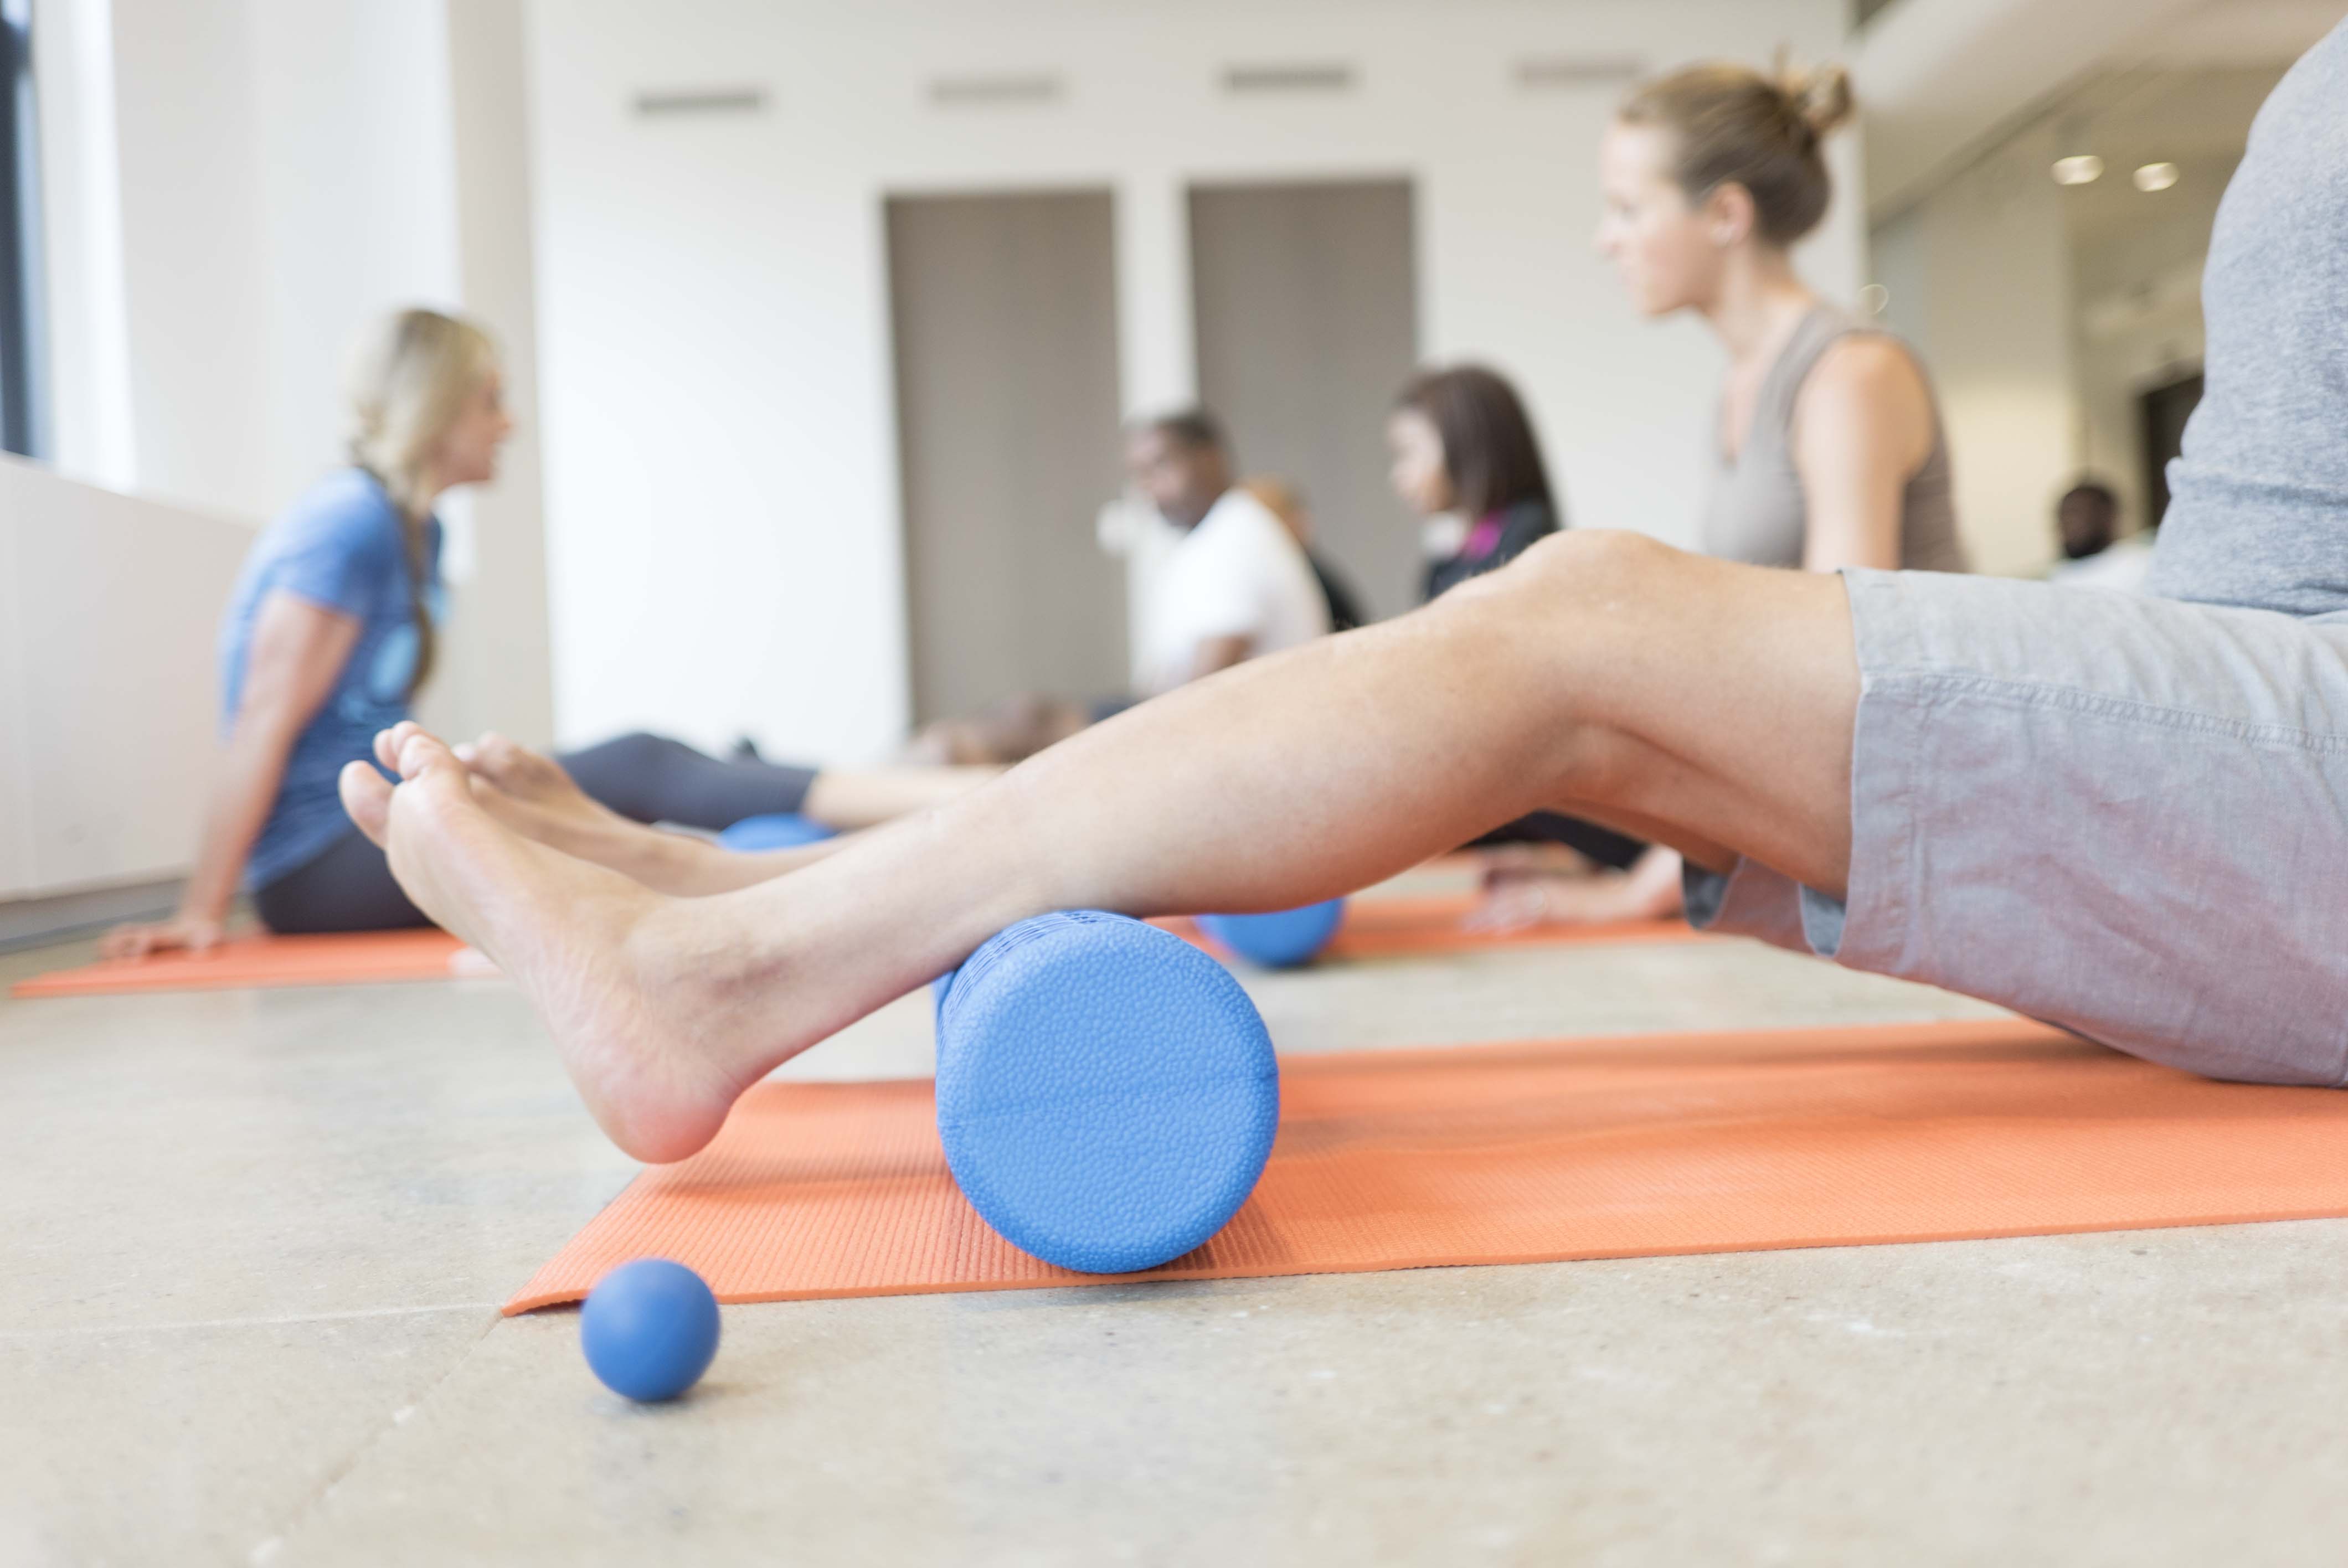 MELT Method classes for aches and pains